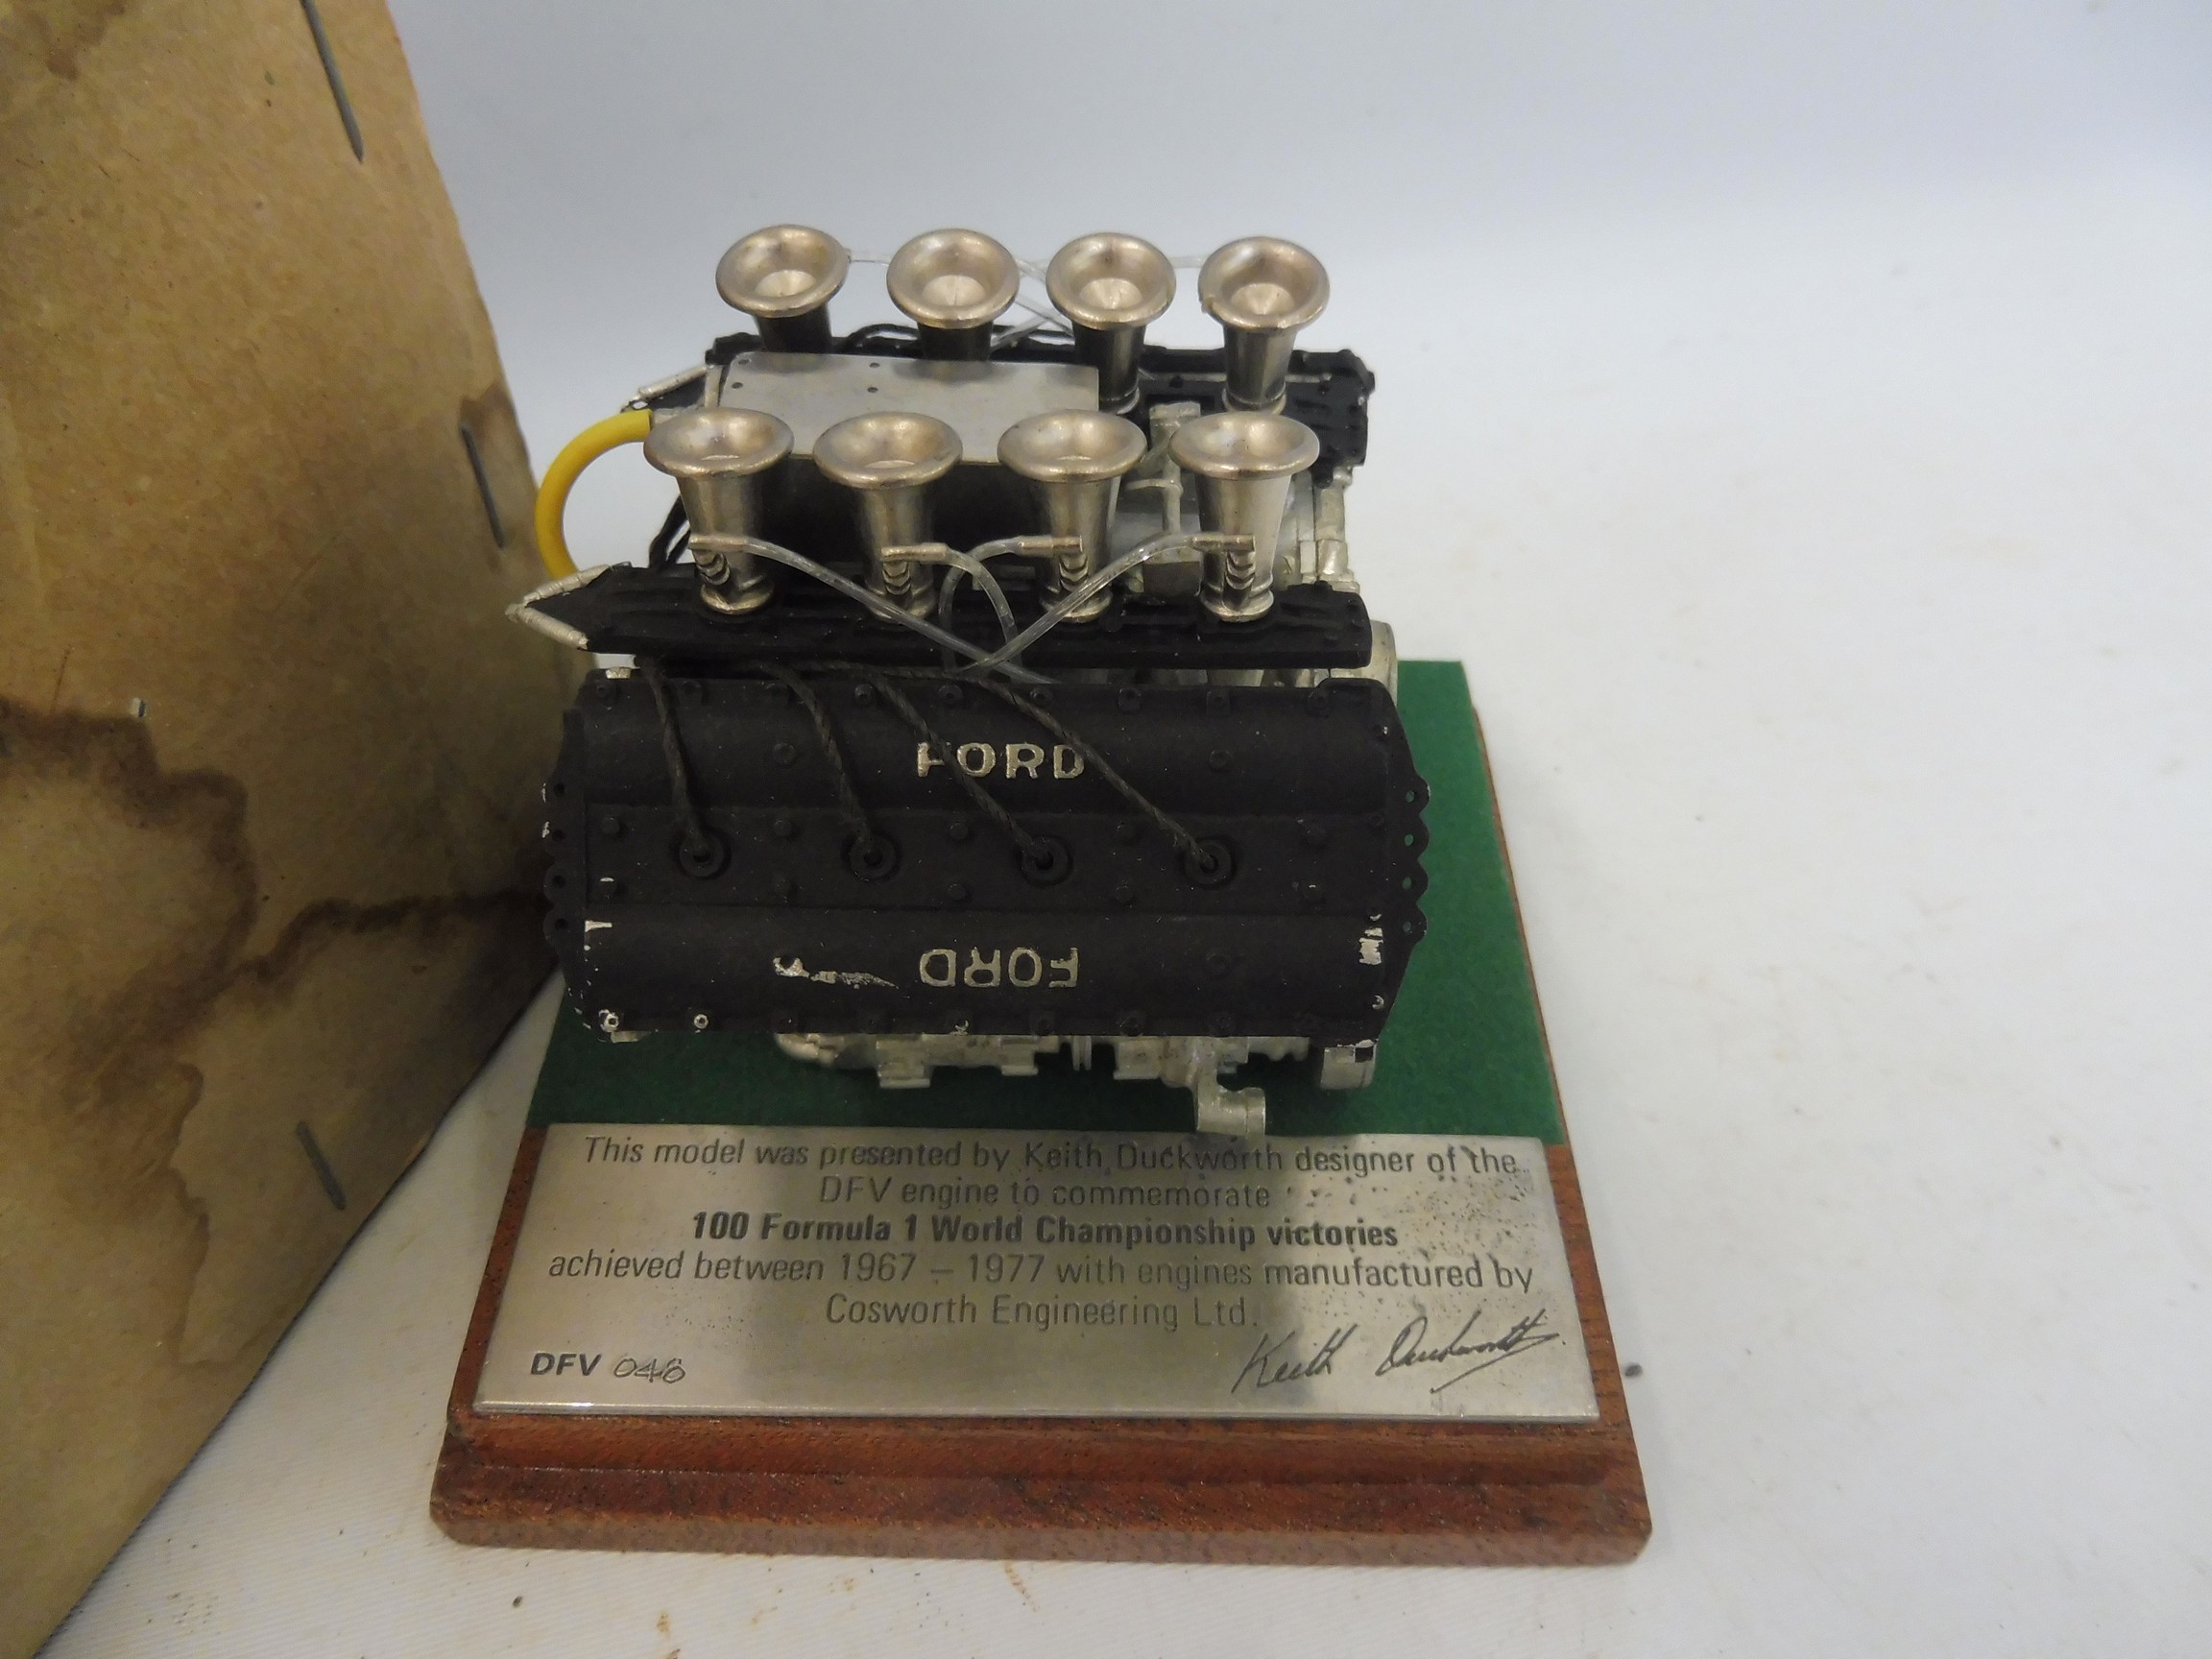 A Keith Duckworth (designer of DFV Ford Cosworth engine) limited edition scale model of a Ford